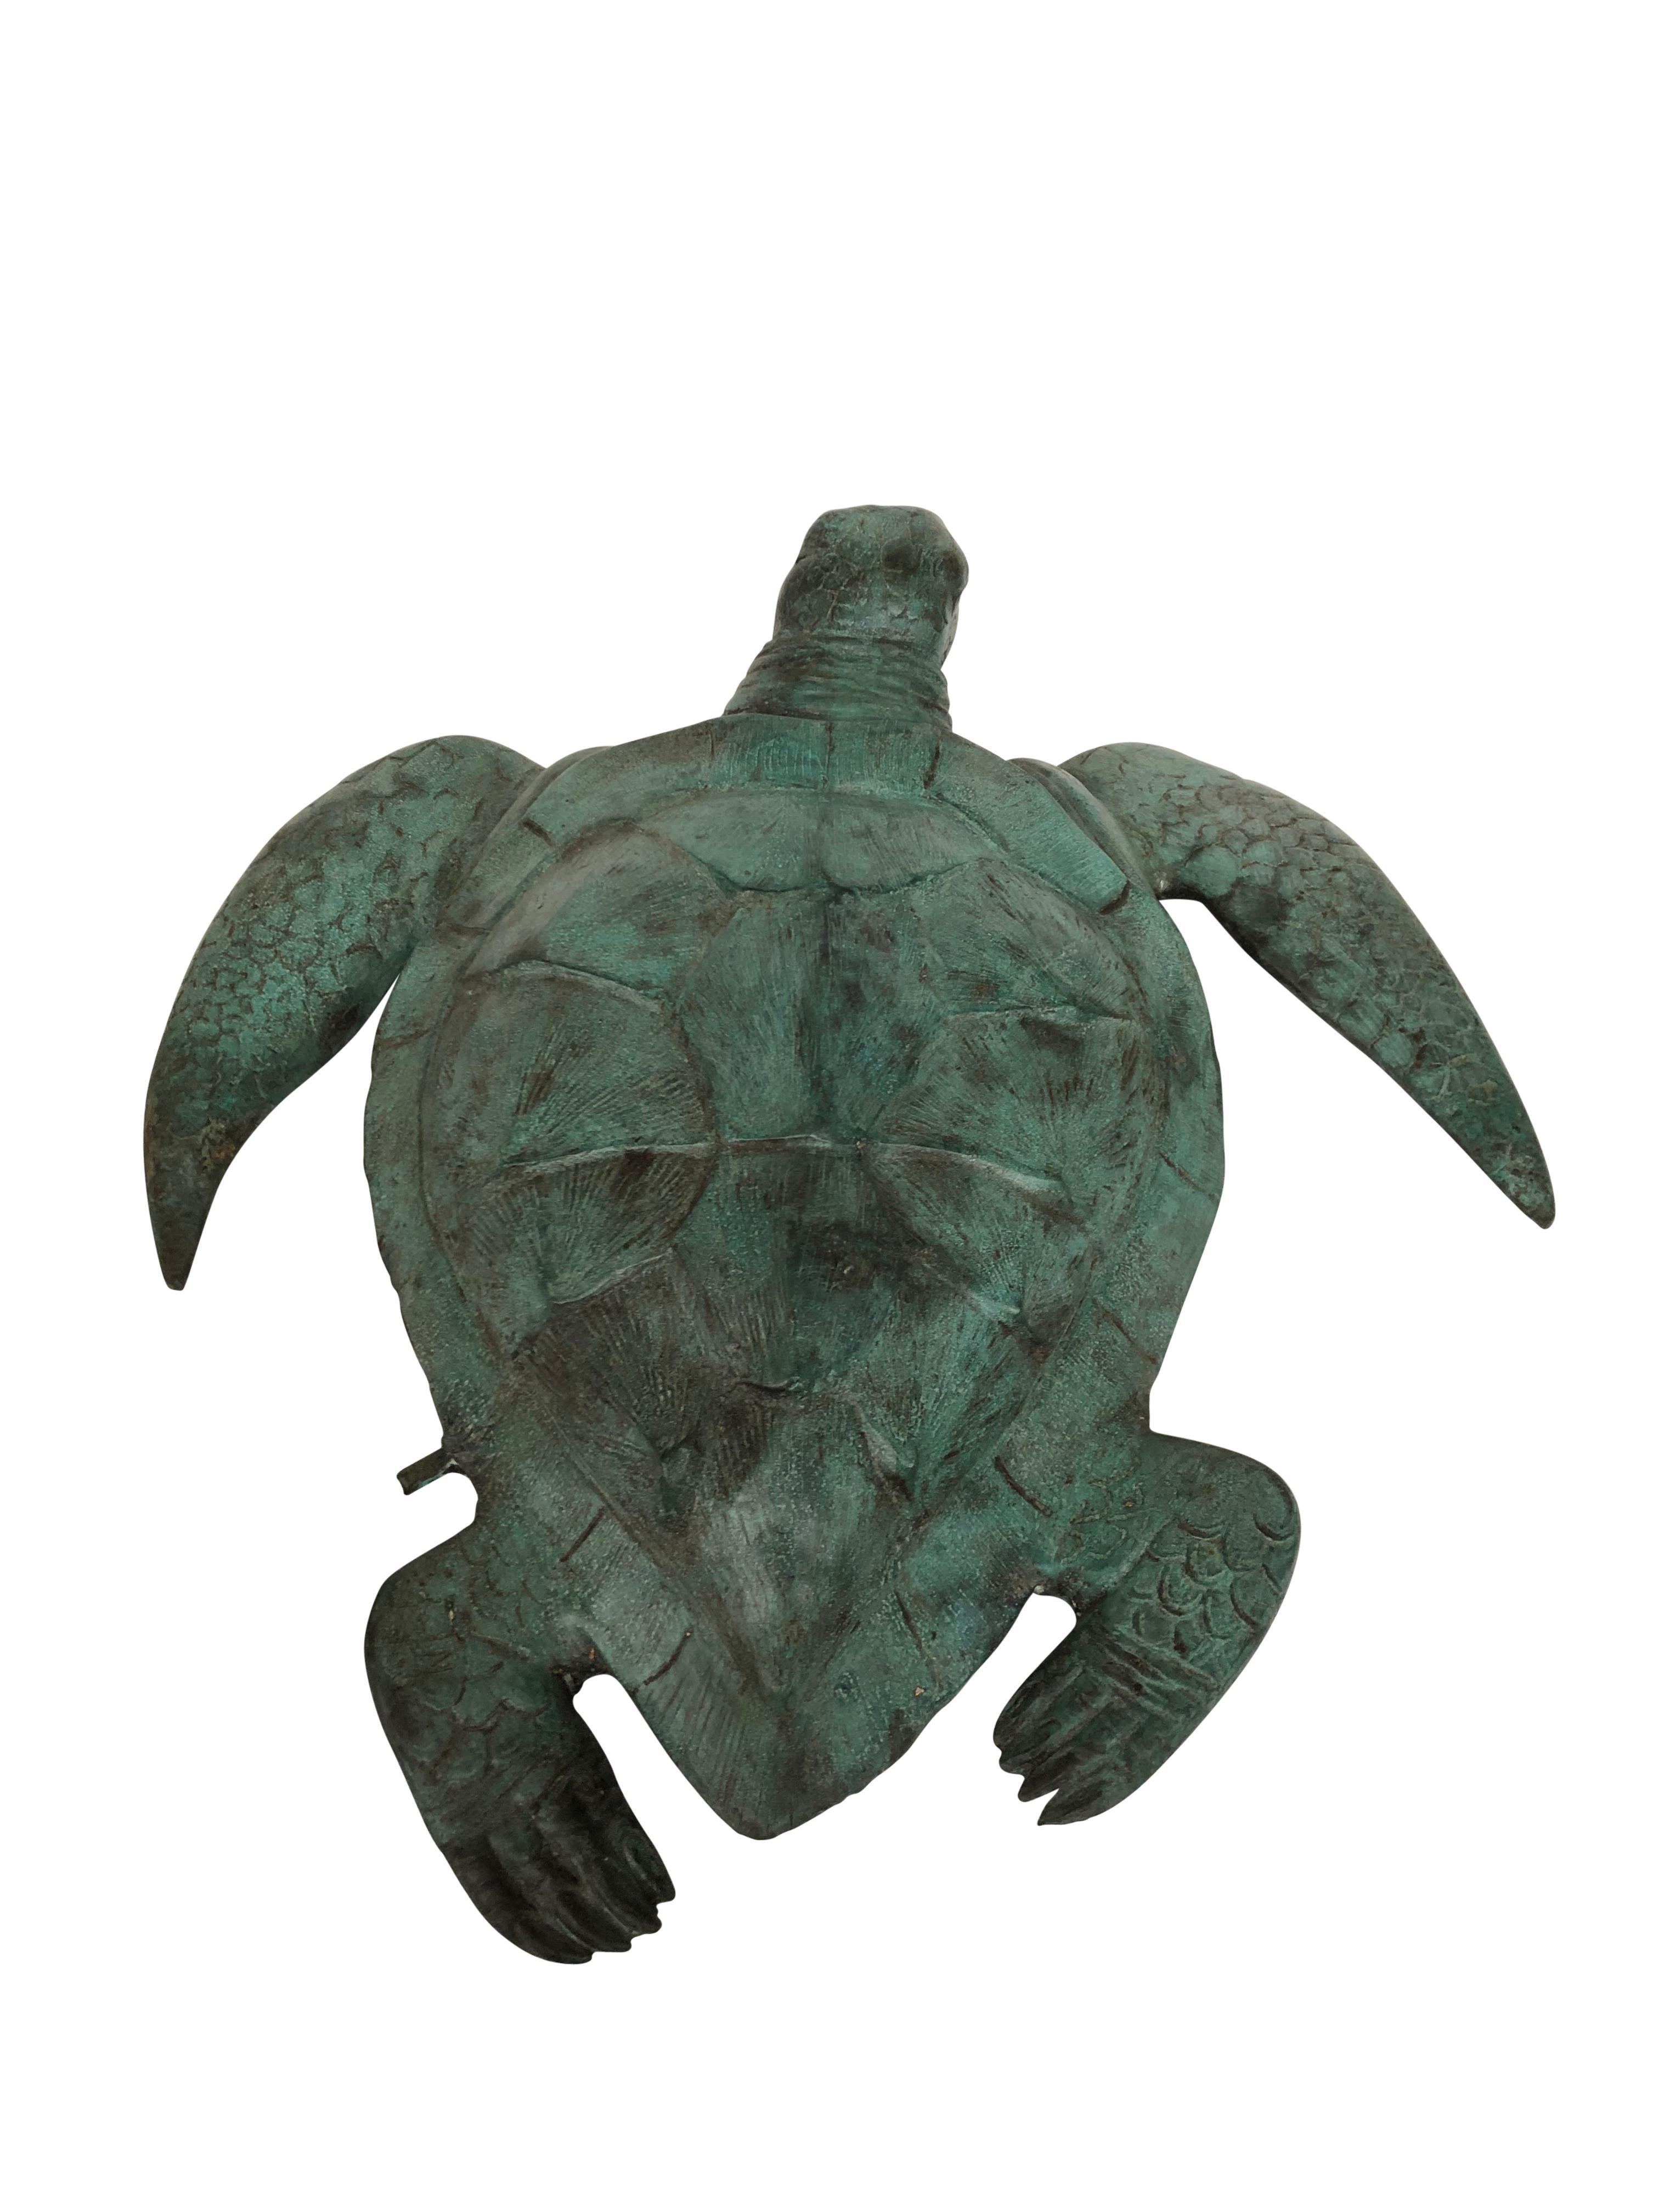 A gorgeous bronze casting of a sea turtle. Fantastic green patina to this piece. Functions as a fountain with the water spouting from the mouth. Of course being bronze this piece can live outside with no fear of rusting. Offered in excellent shape